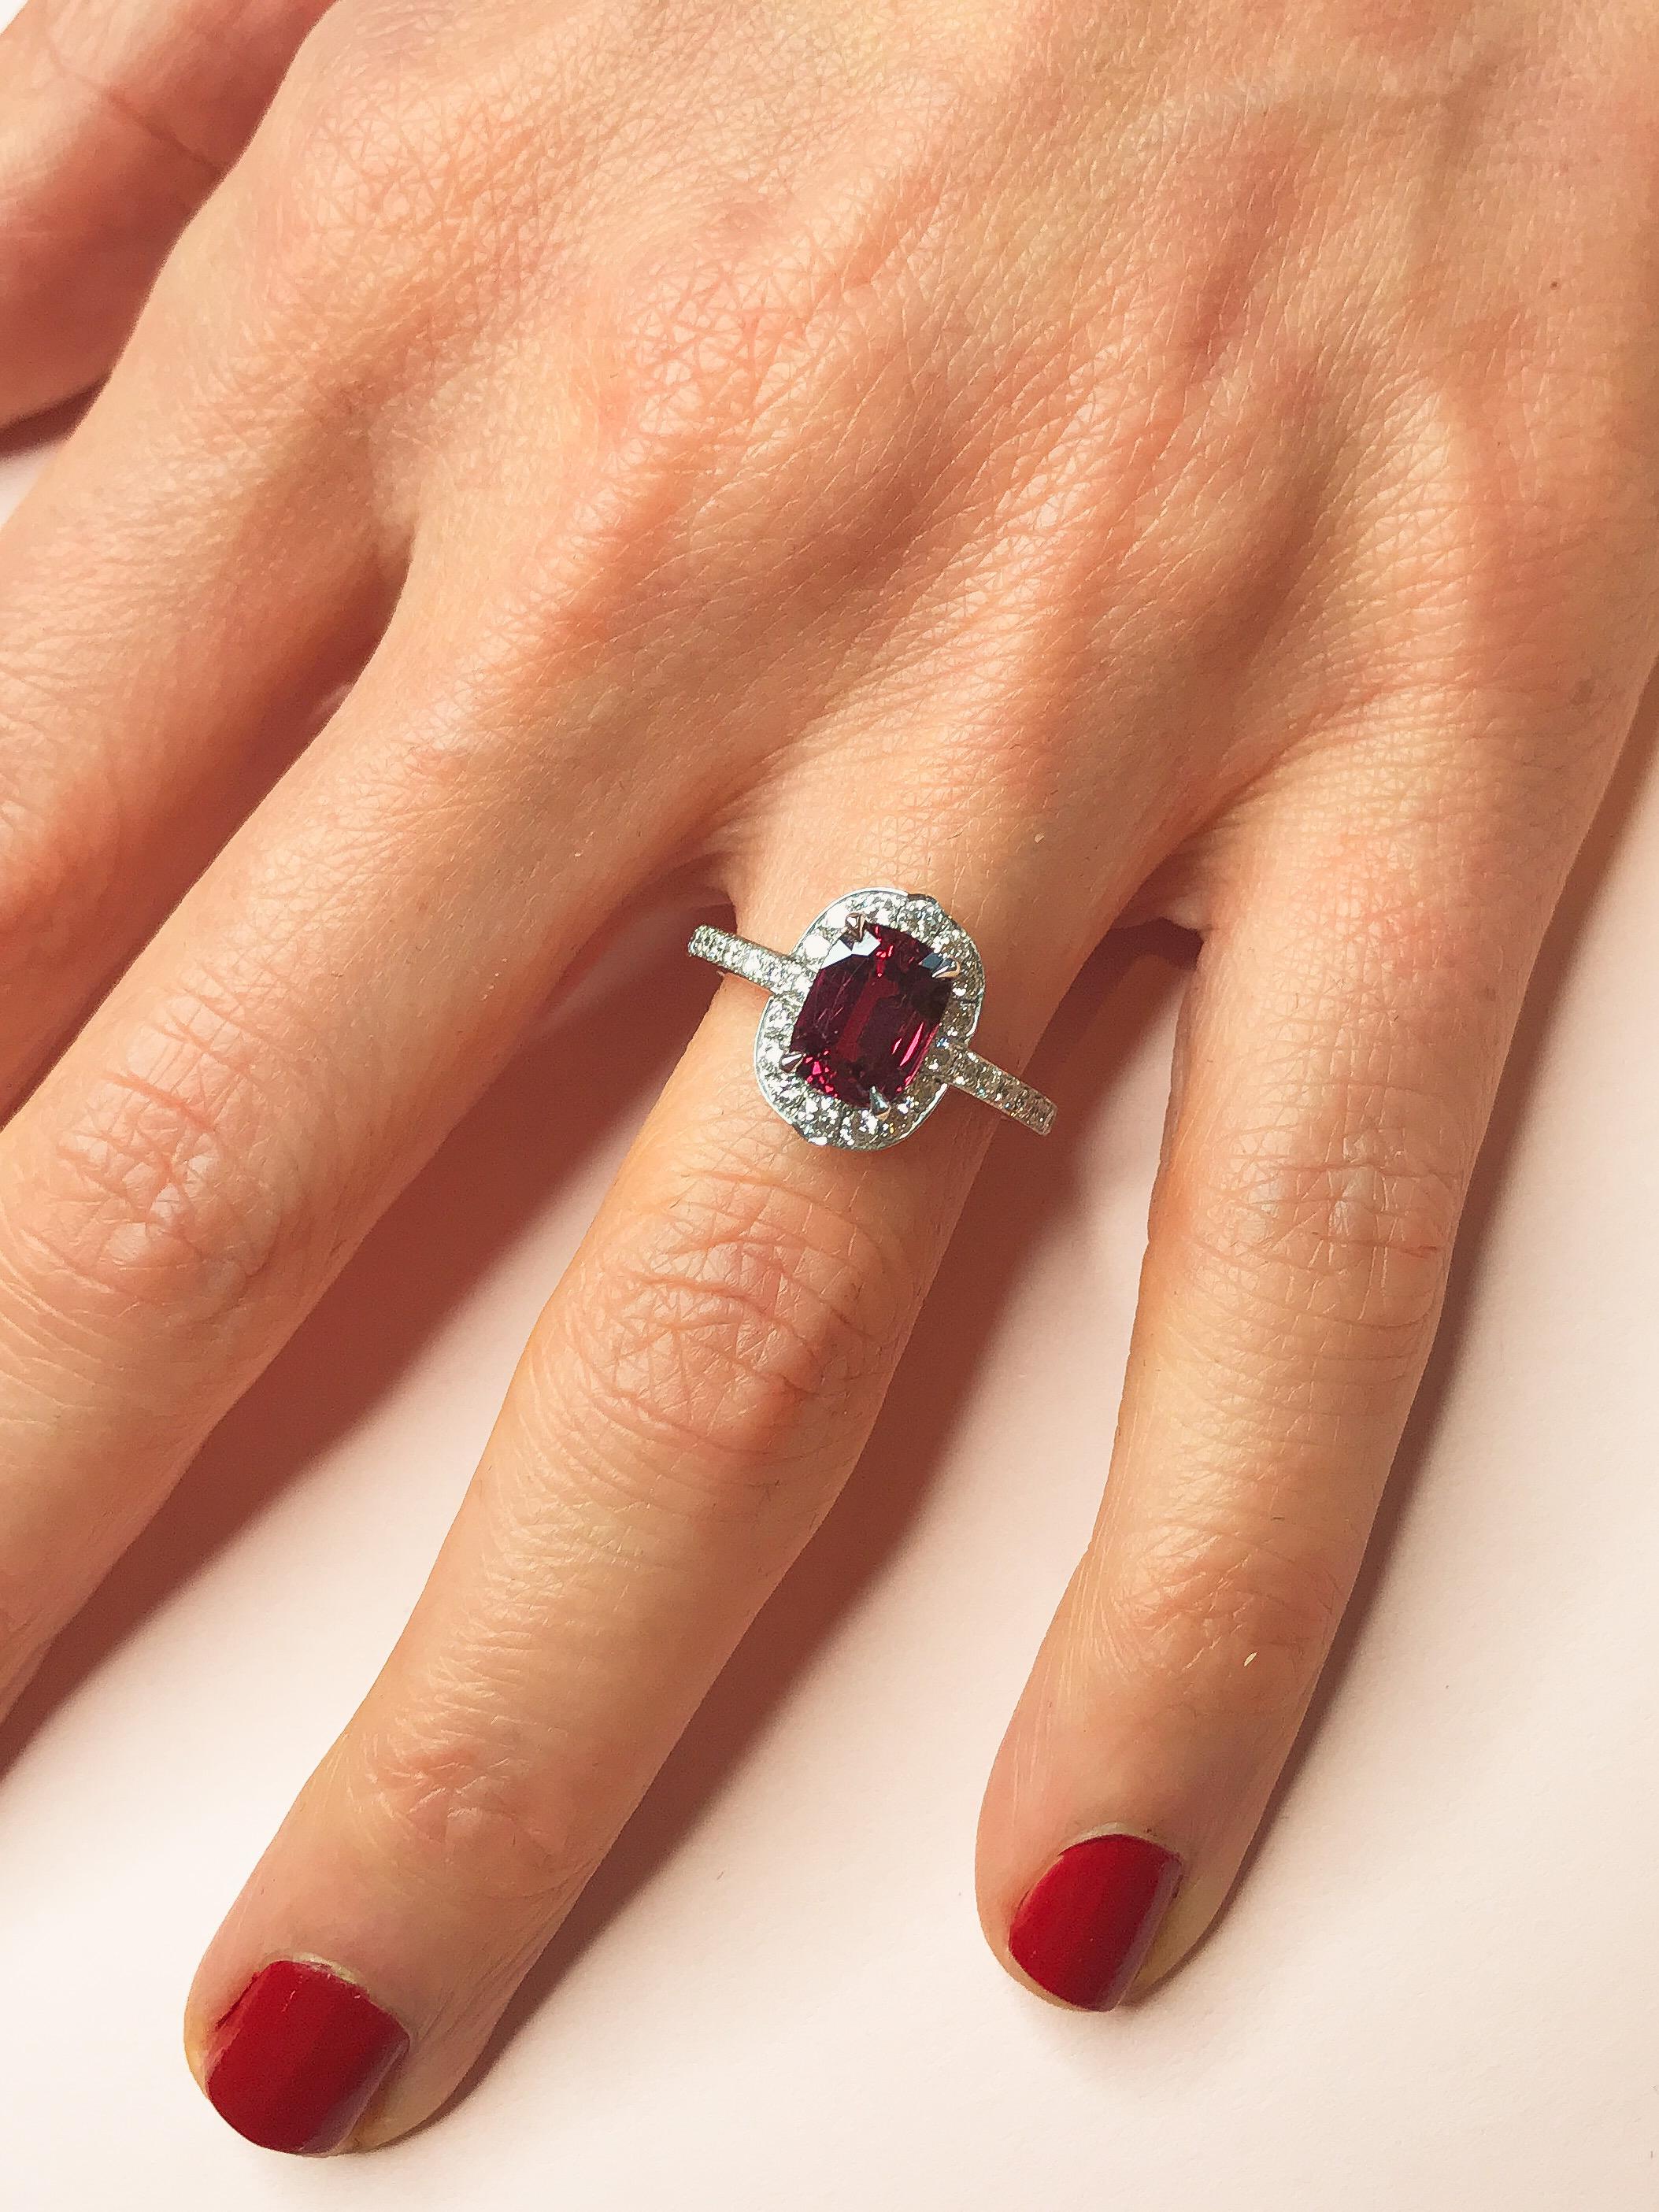 Featuring an alluring red ruby at its centre, this ring manages to be both timeless and unexpected. Hand-picked from the Haruni vault, the centre stone weighs 2.70 carats and is a vivid red colour, enhanced by the classic white diamond halo